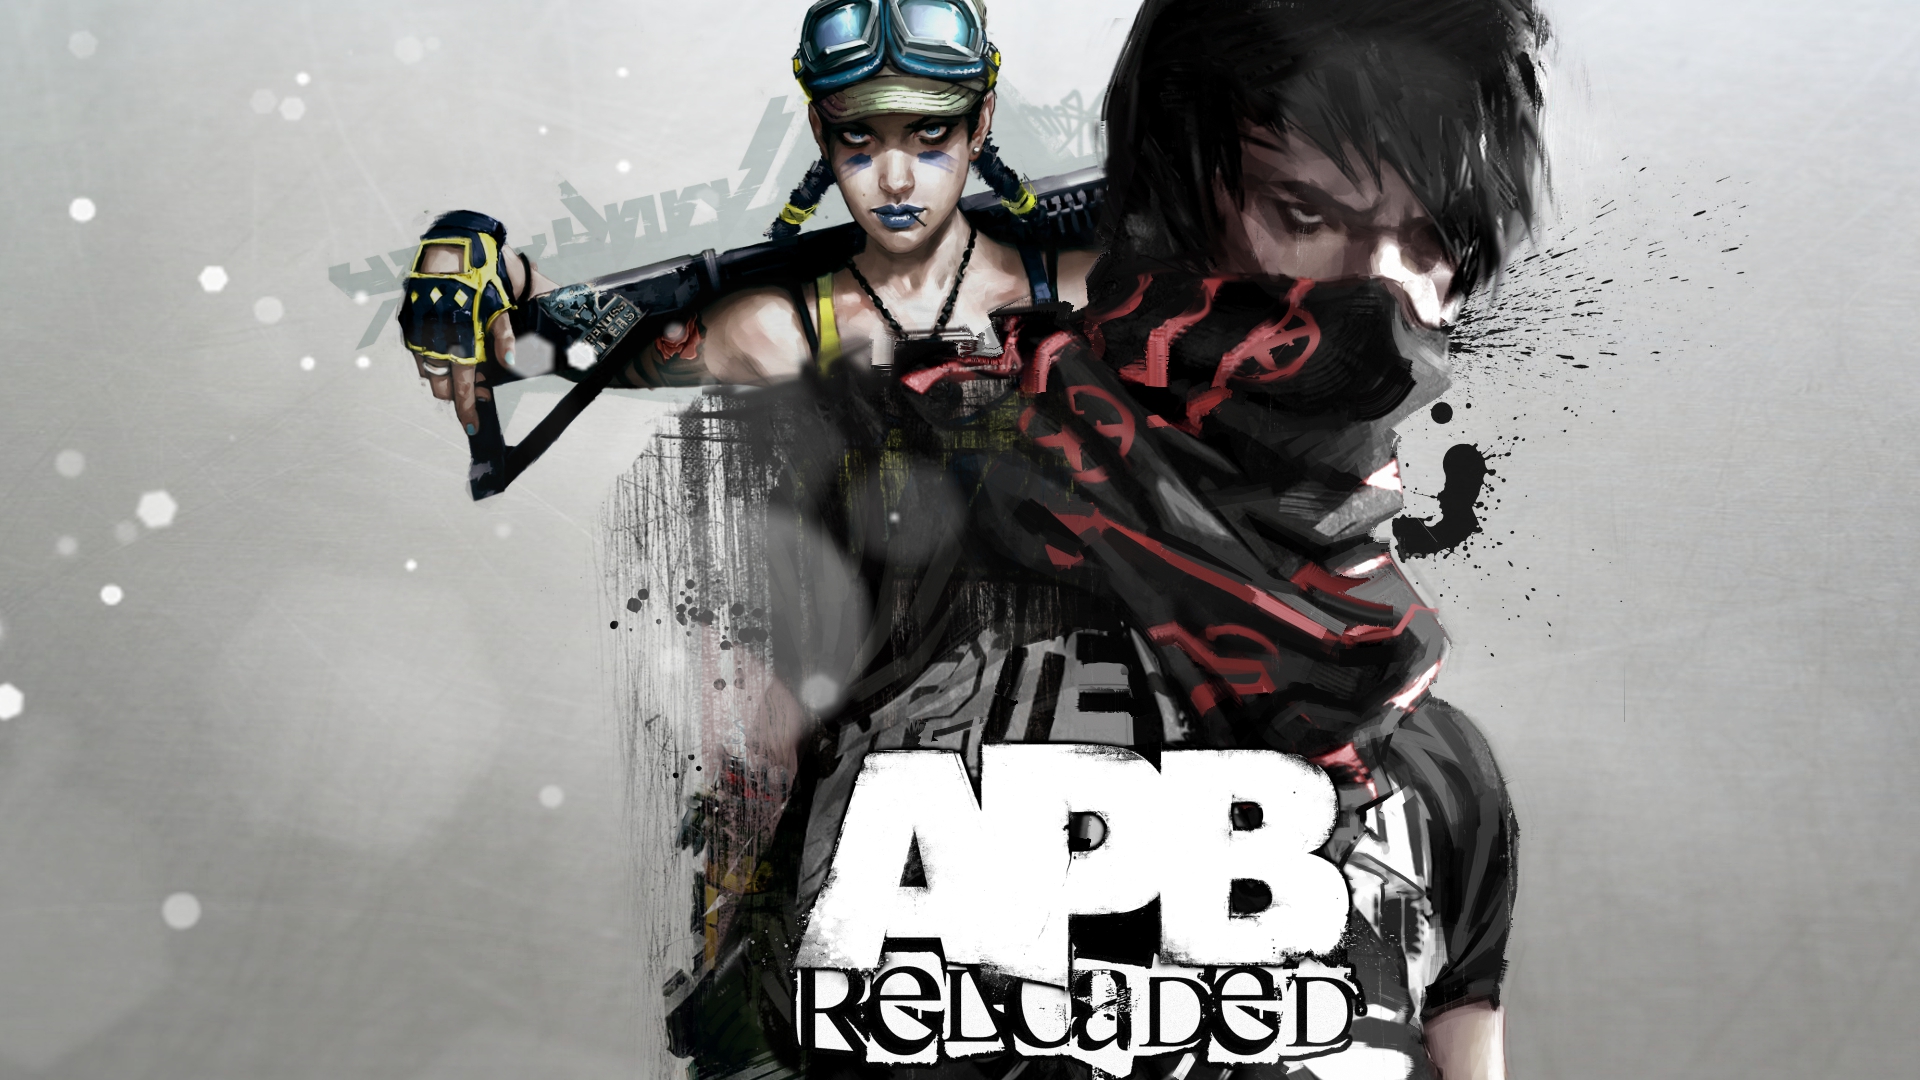 Apb reloaded for steam фото 56